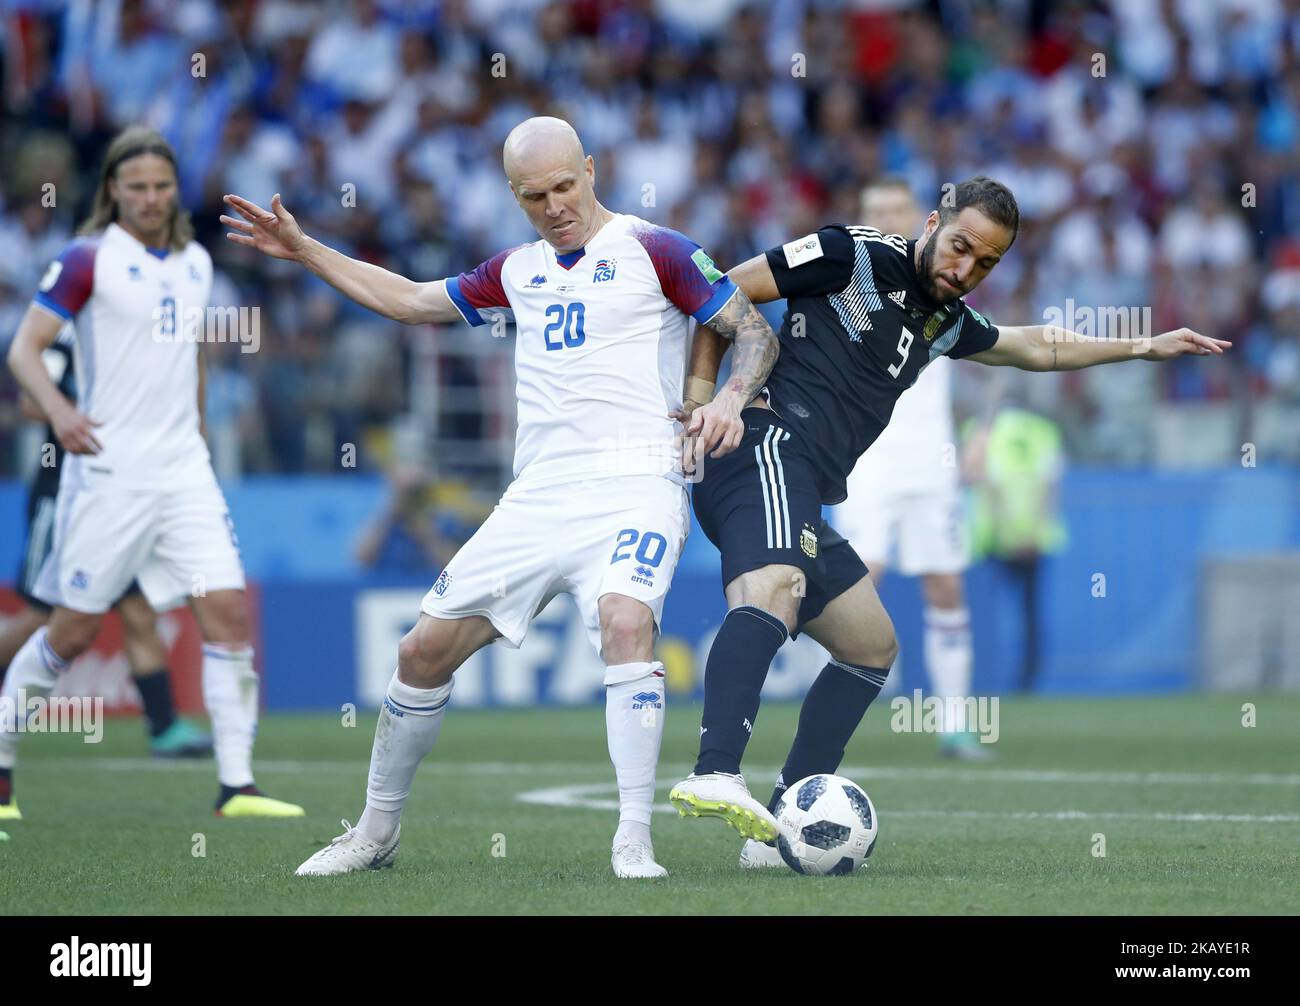 Group D Argetnina v Iceland - FIFA World Cup Russia 2018 Emil Hallfredsson (Iceland) and Gonzalo Higuain (Argentina) at Spartak Stadium in Moscow, Russia on June 16, 2018. (Photo by Matteo Ciambelli/NurPhoto)  Stock Photo